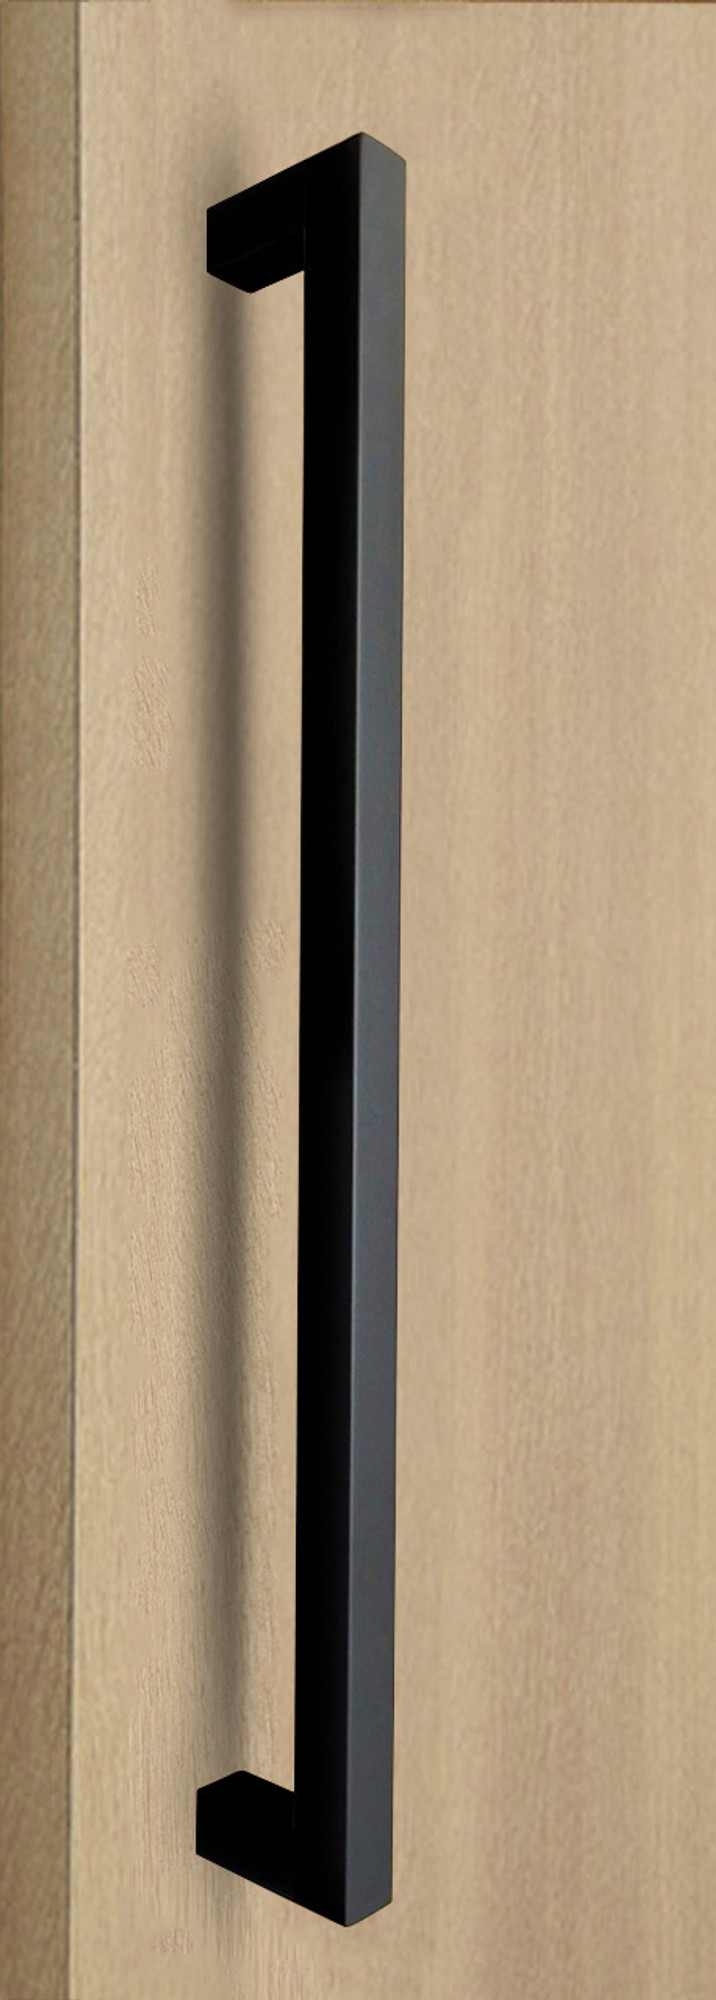 One Sided 1" x 1" Square Pull Handle, Matte Black Powder Coated Finish, 304 Grade Stainless Steel Alloy